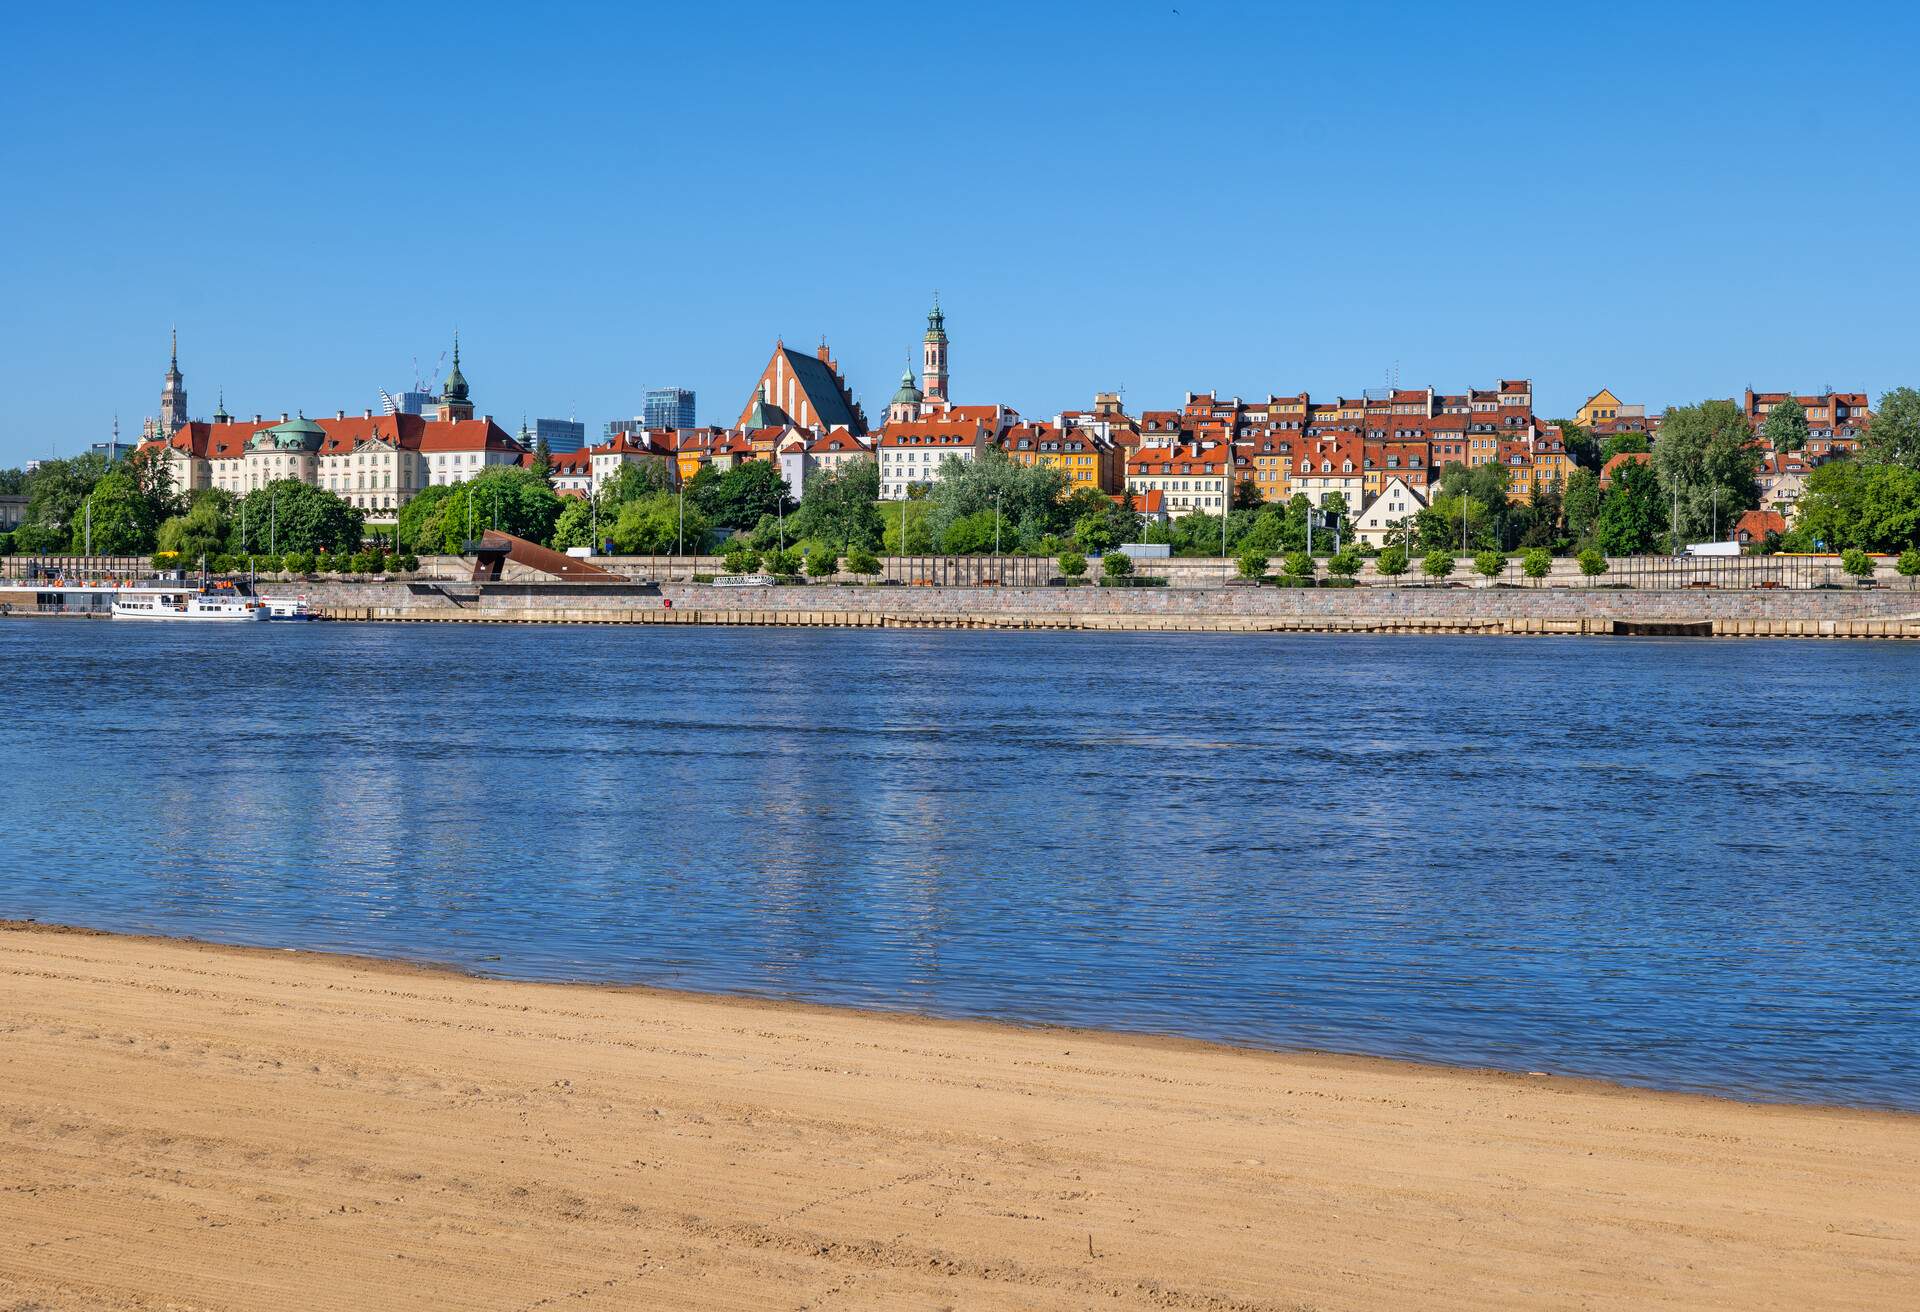 Beach at the Vistula river in city of Warsaw in Poland with view to the Old Town skyline.